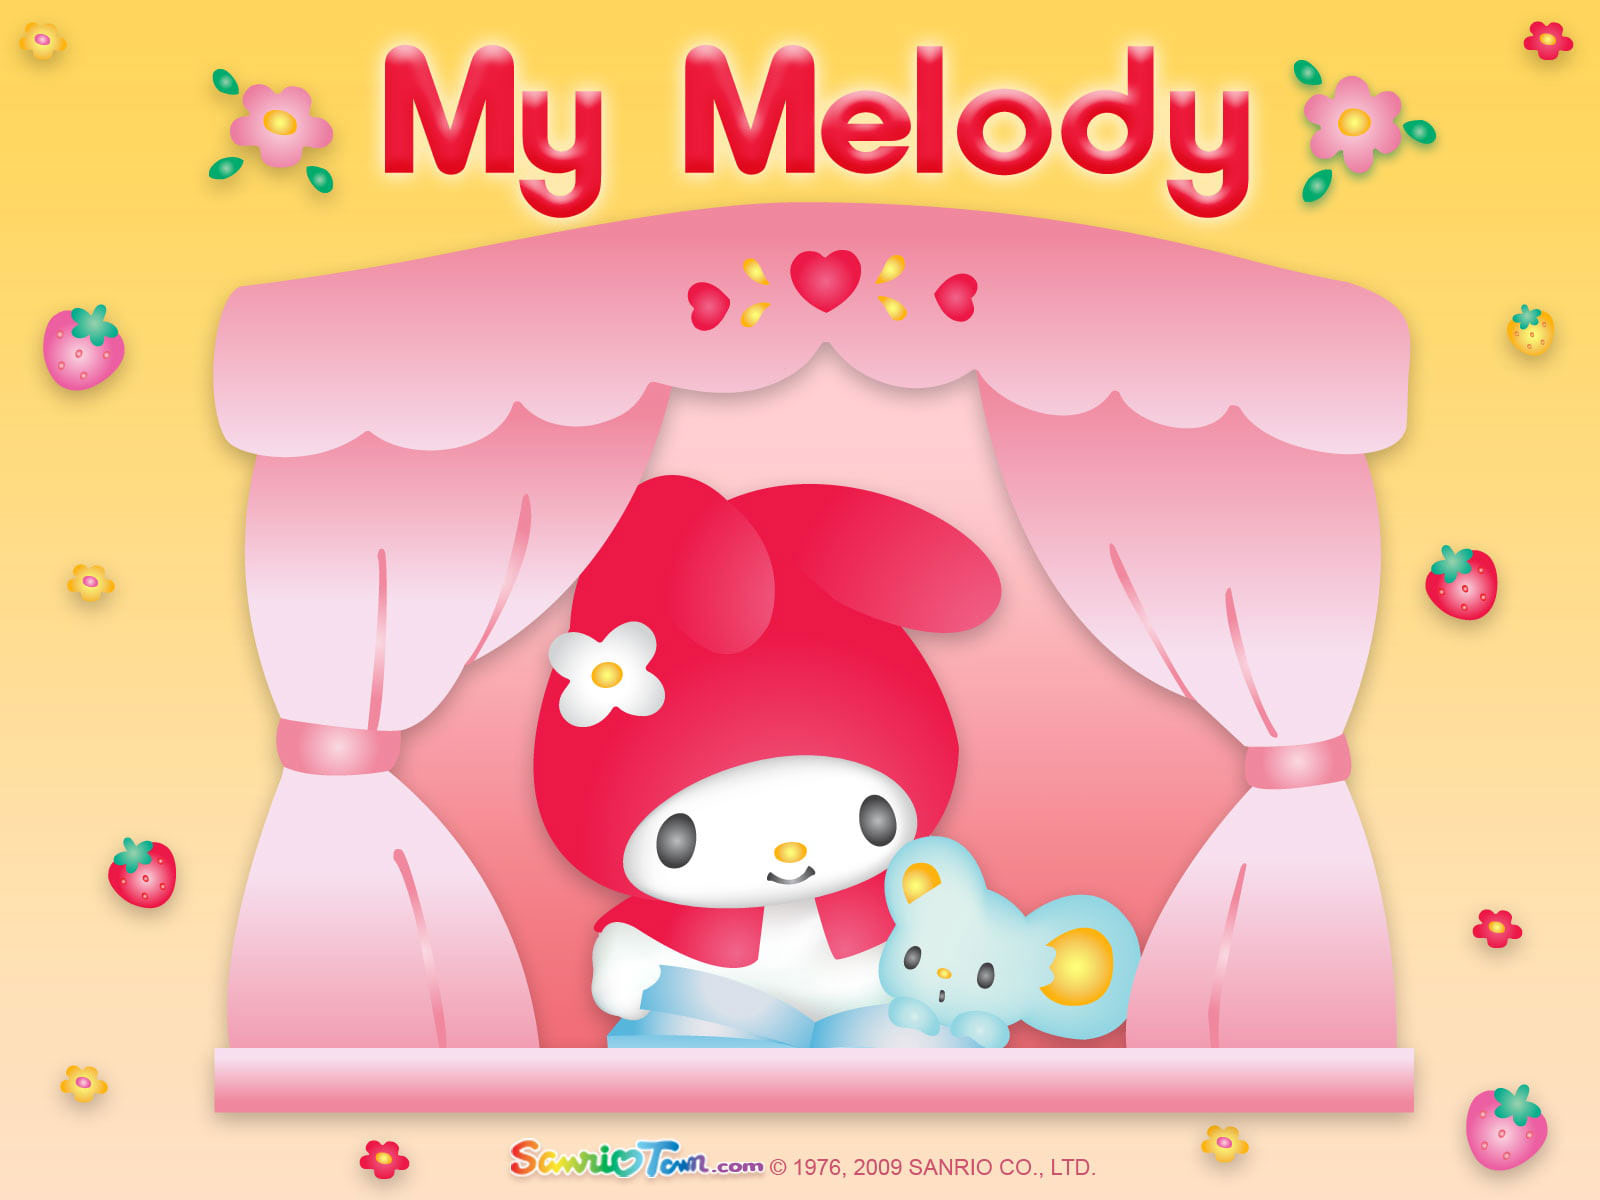 My melody wallpaper iphone